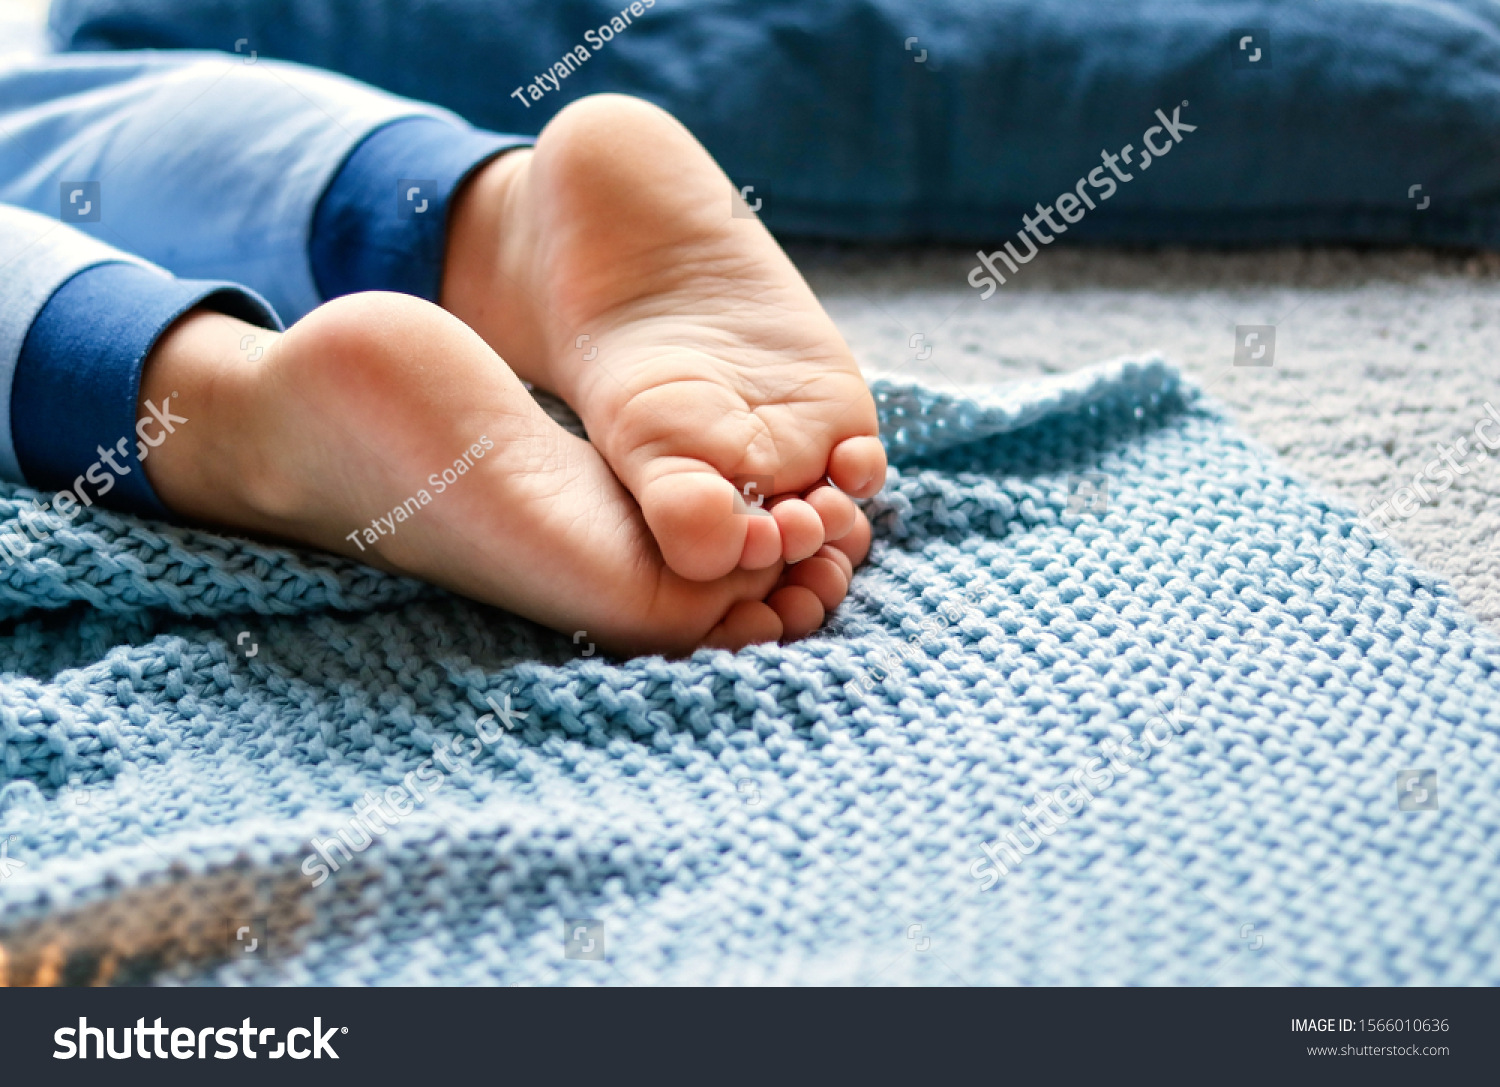 Cozy holidays at home. Close up photo of little child barefooted feet on blue knitted blanket lying on floor in pyjama. Winter season lifestyle. Leisure time. Sweet childhood. Copy space  #1566010636